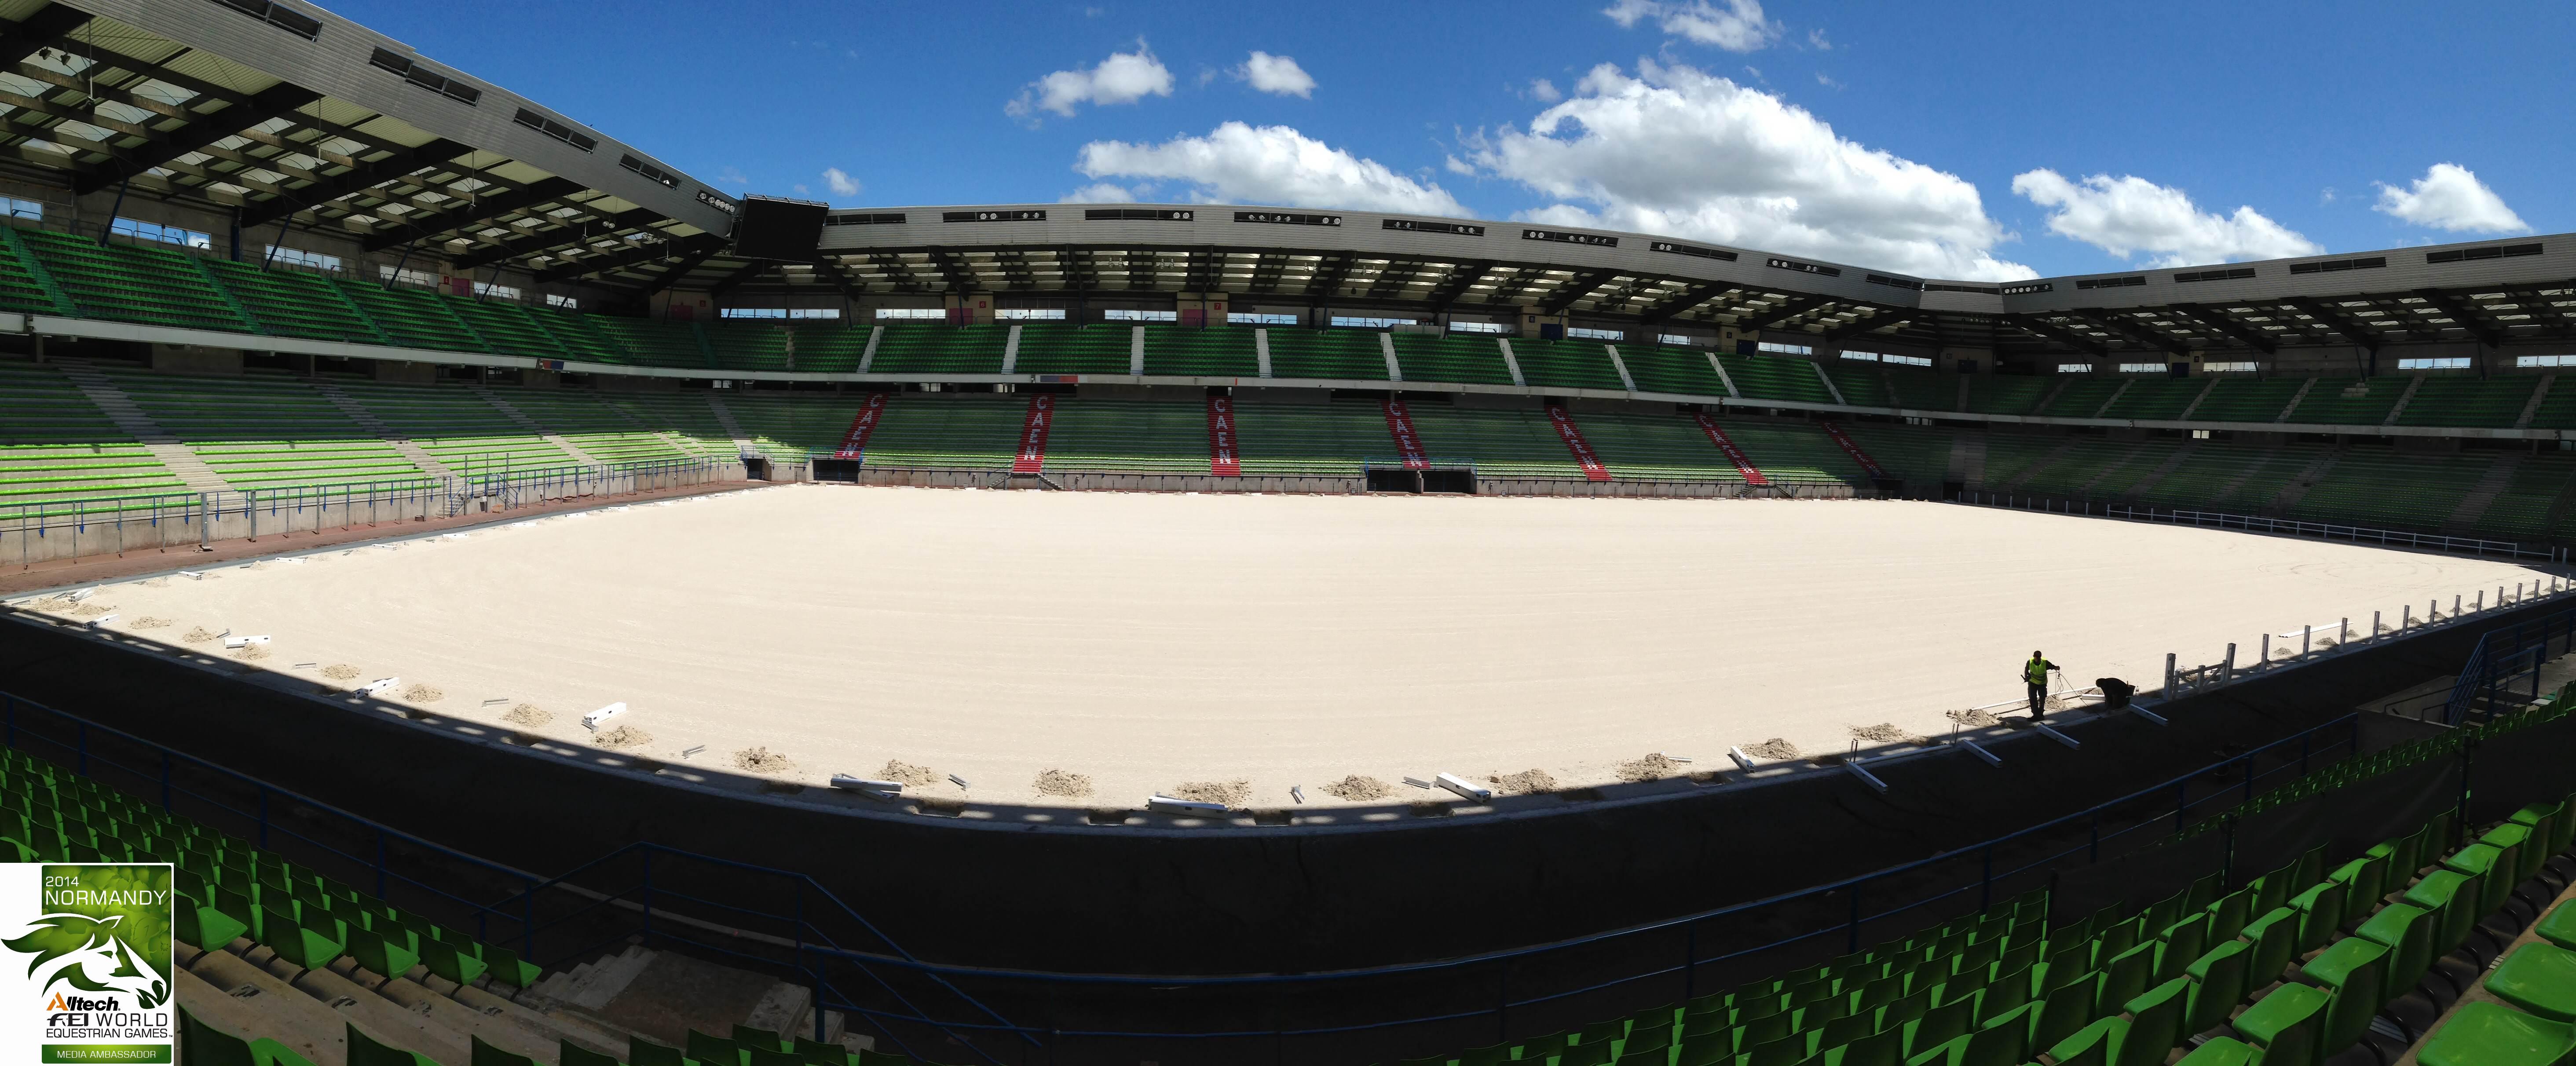 EEF :News :TEST EVENTS FOR THE ALLTECH FEI WORLD EQUESTRIAN GAMES™ 2014 IN NORMANDY